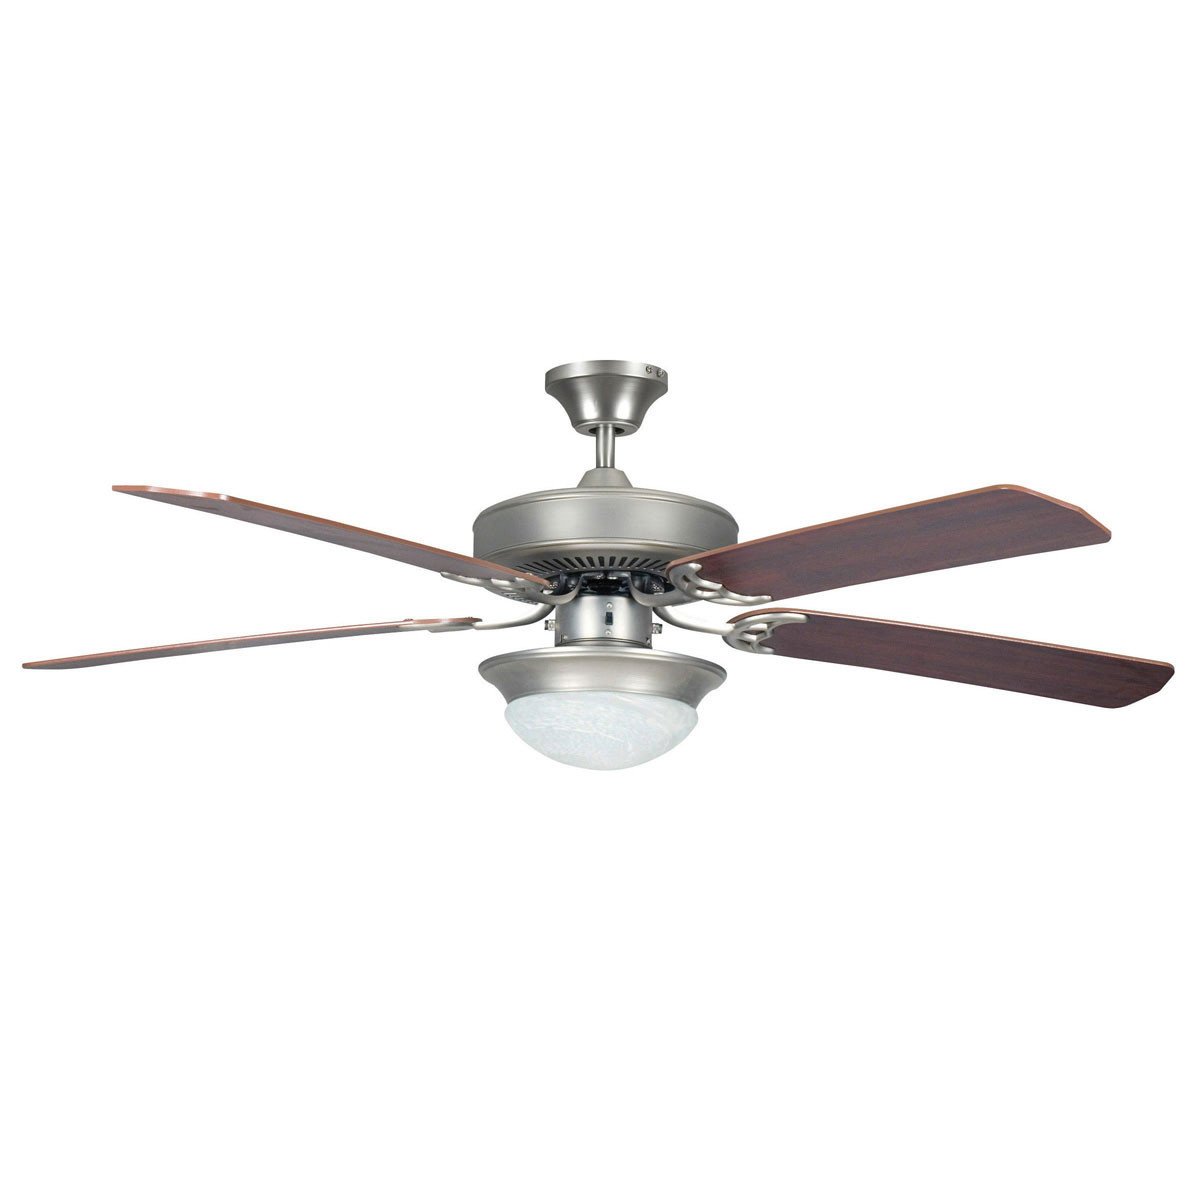 Concord Fans 52" Heritage Fusion Satin Nickel Modern Ceiling Fan with Light Kit